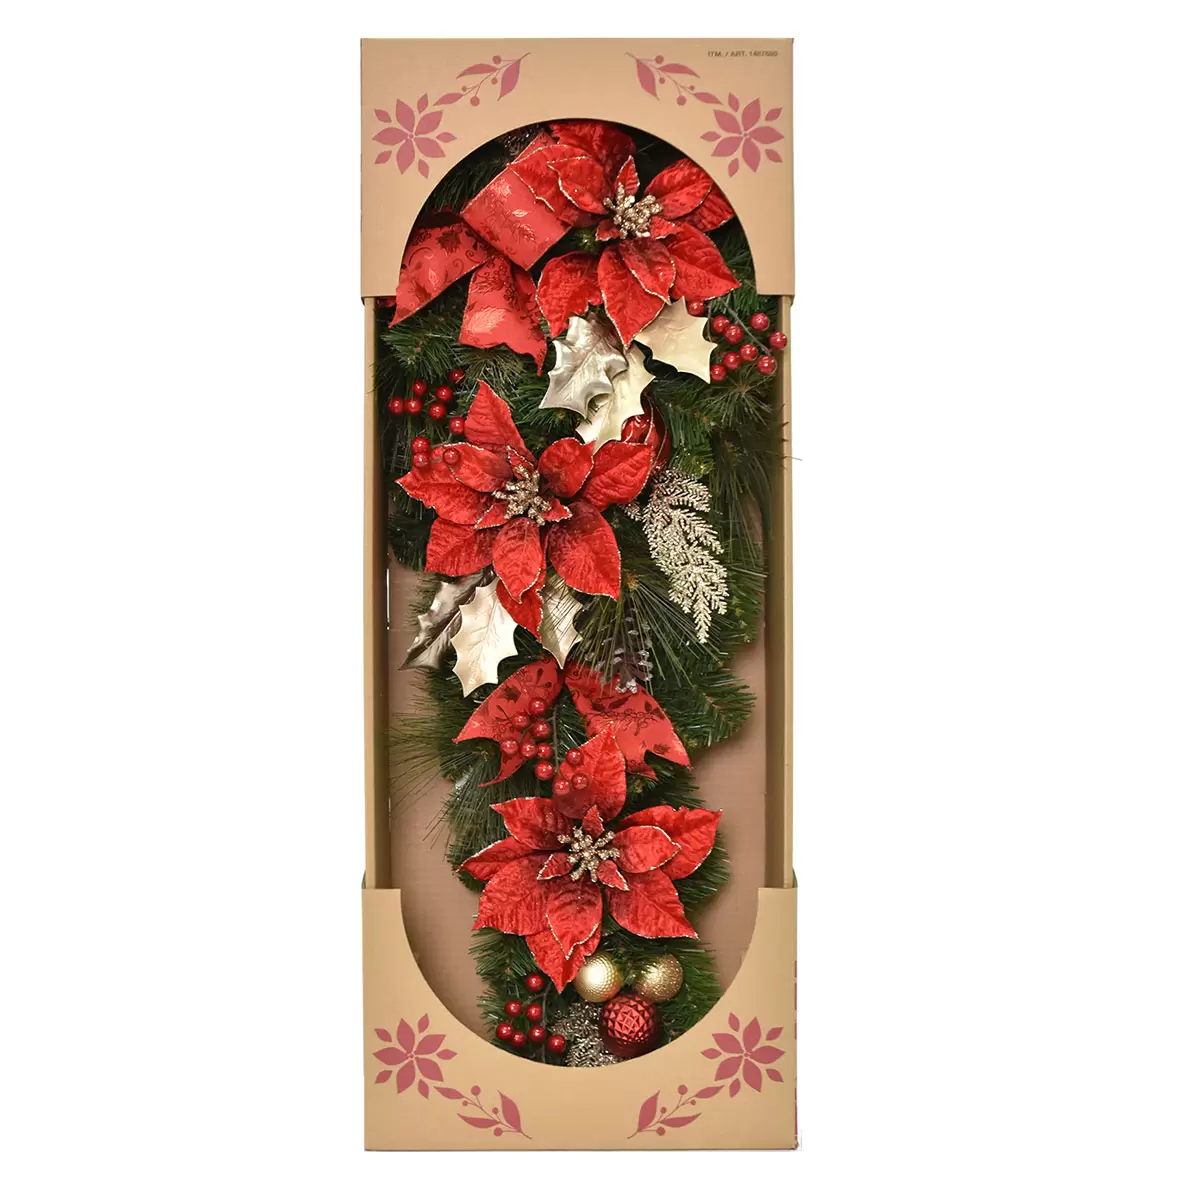 Buy 32" Decorated Swag Red Lifestyle Image at Costco.co.uk